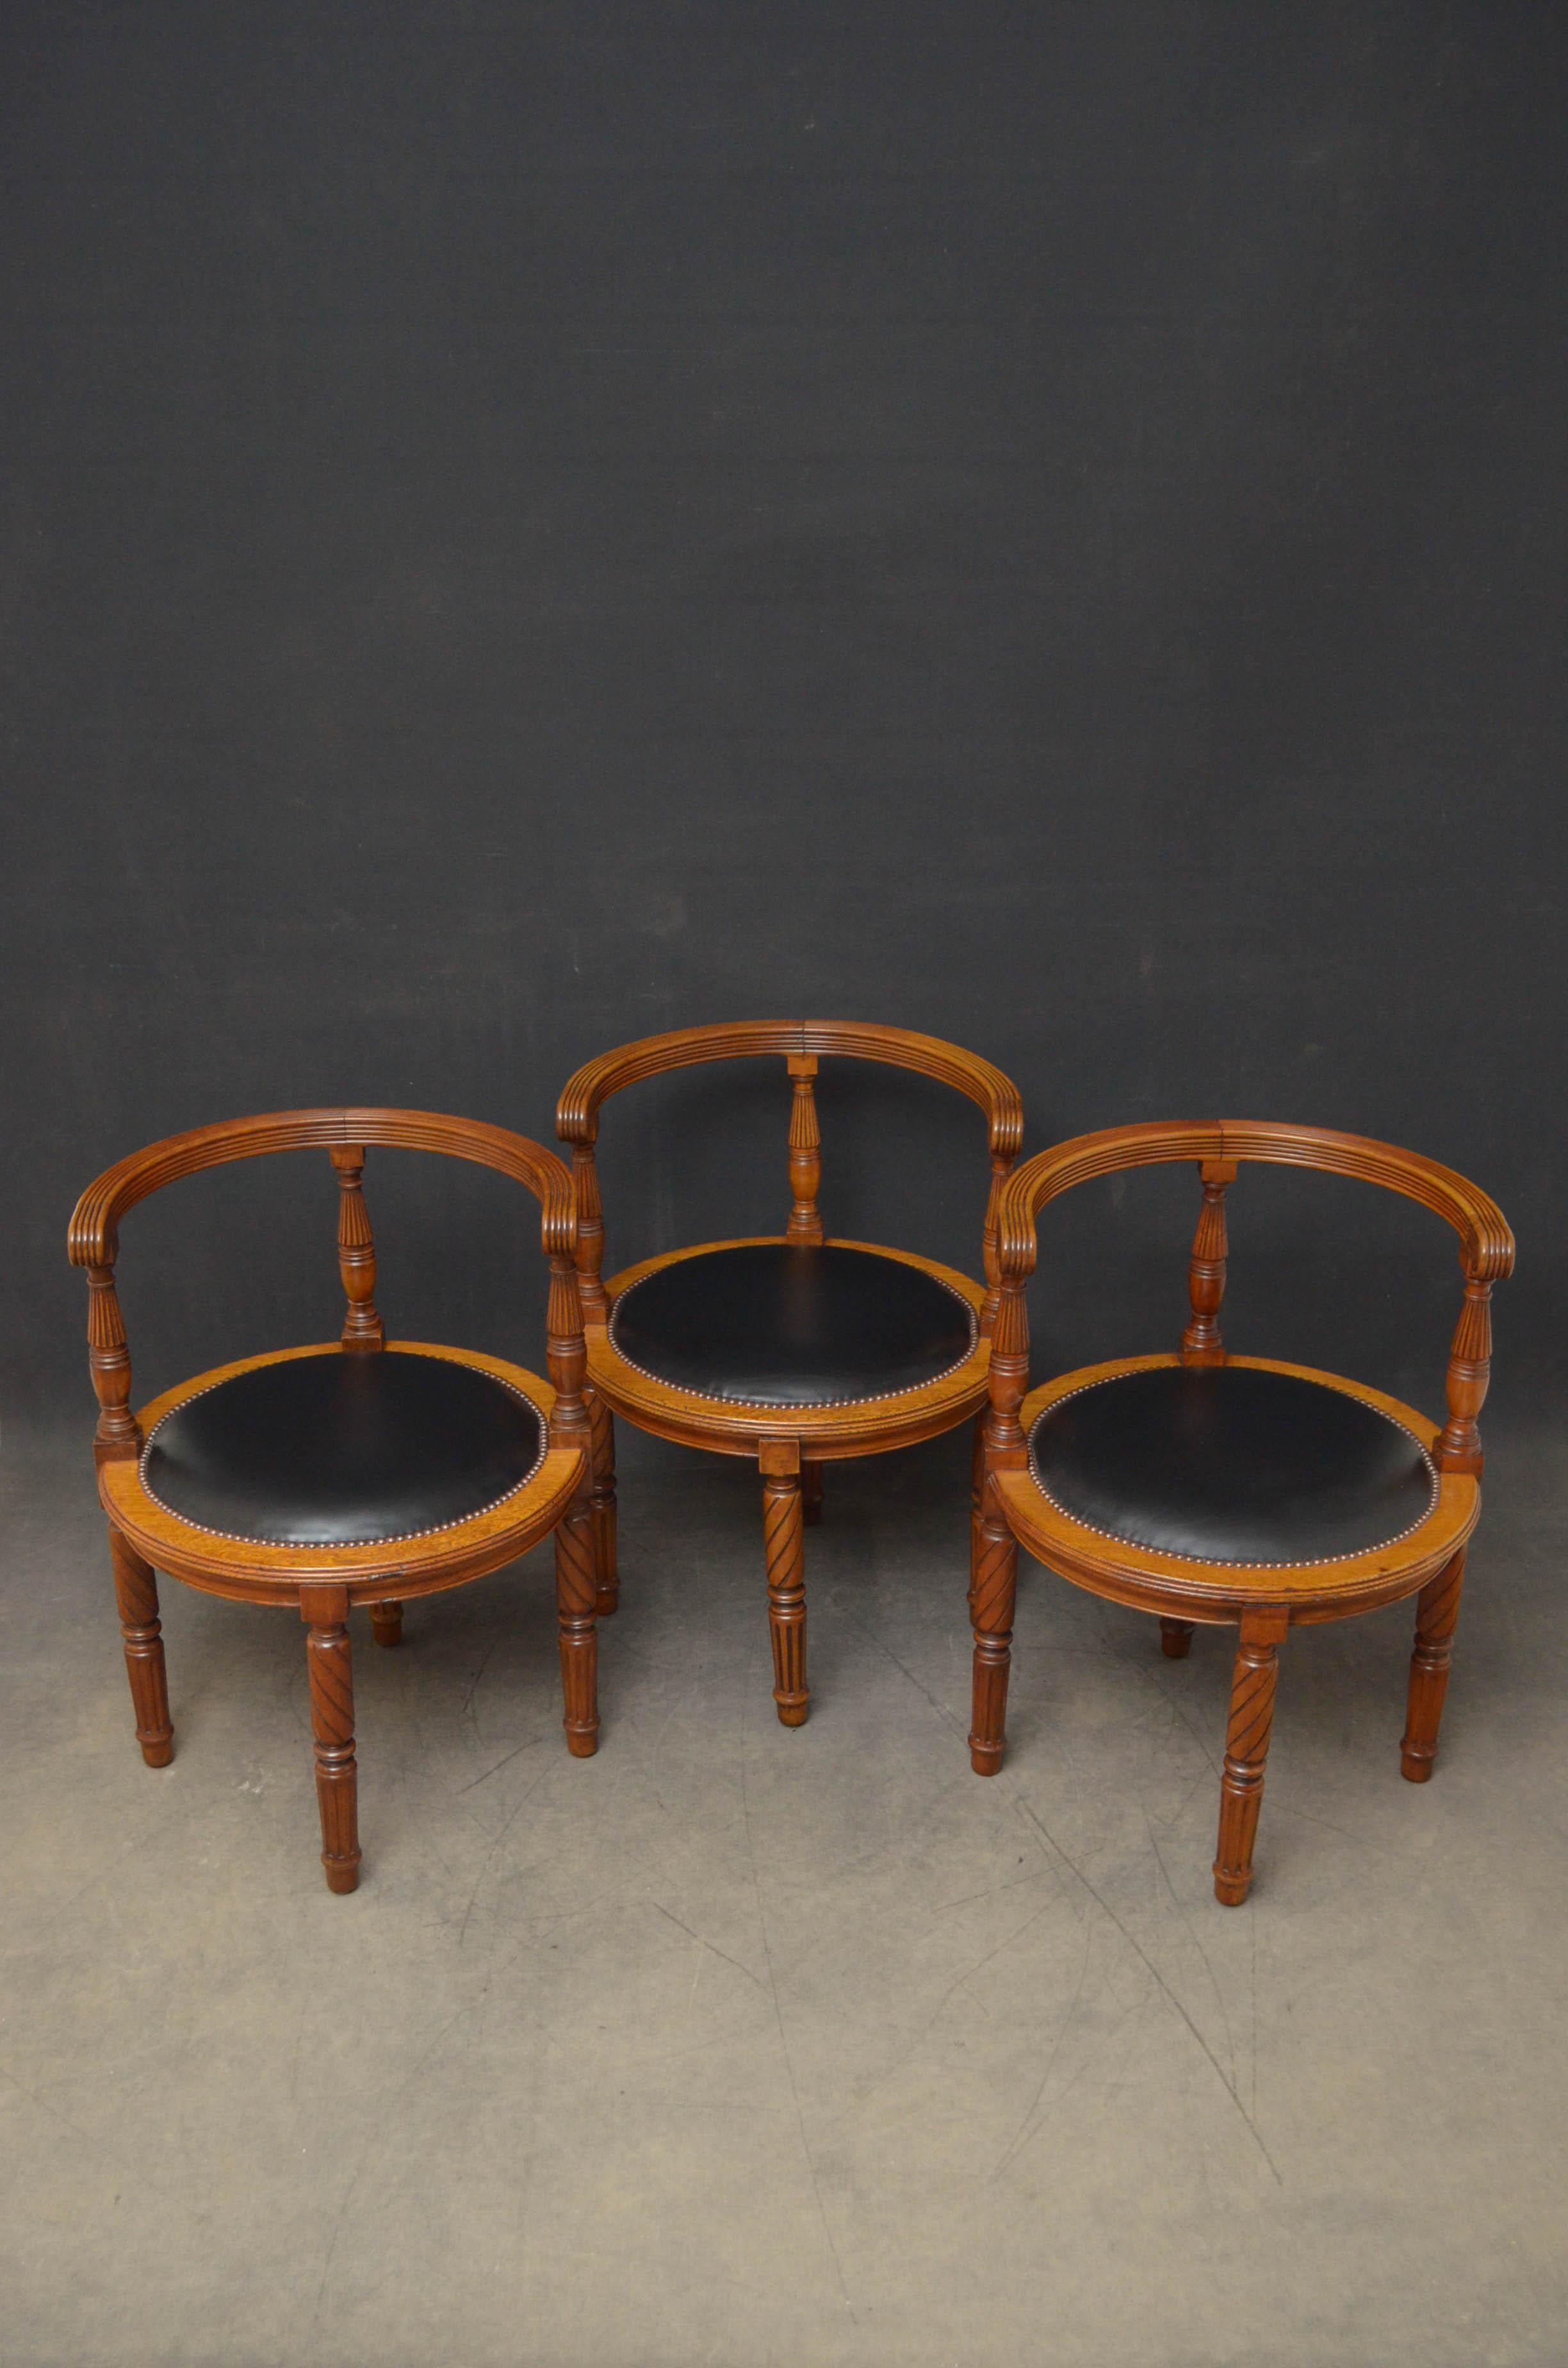 Victorian Set of 3 Library or Office Chairs